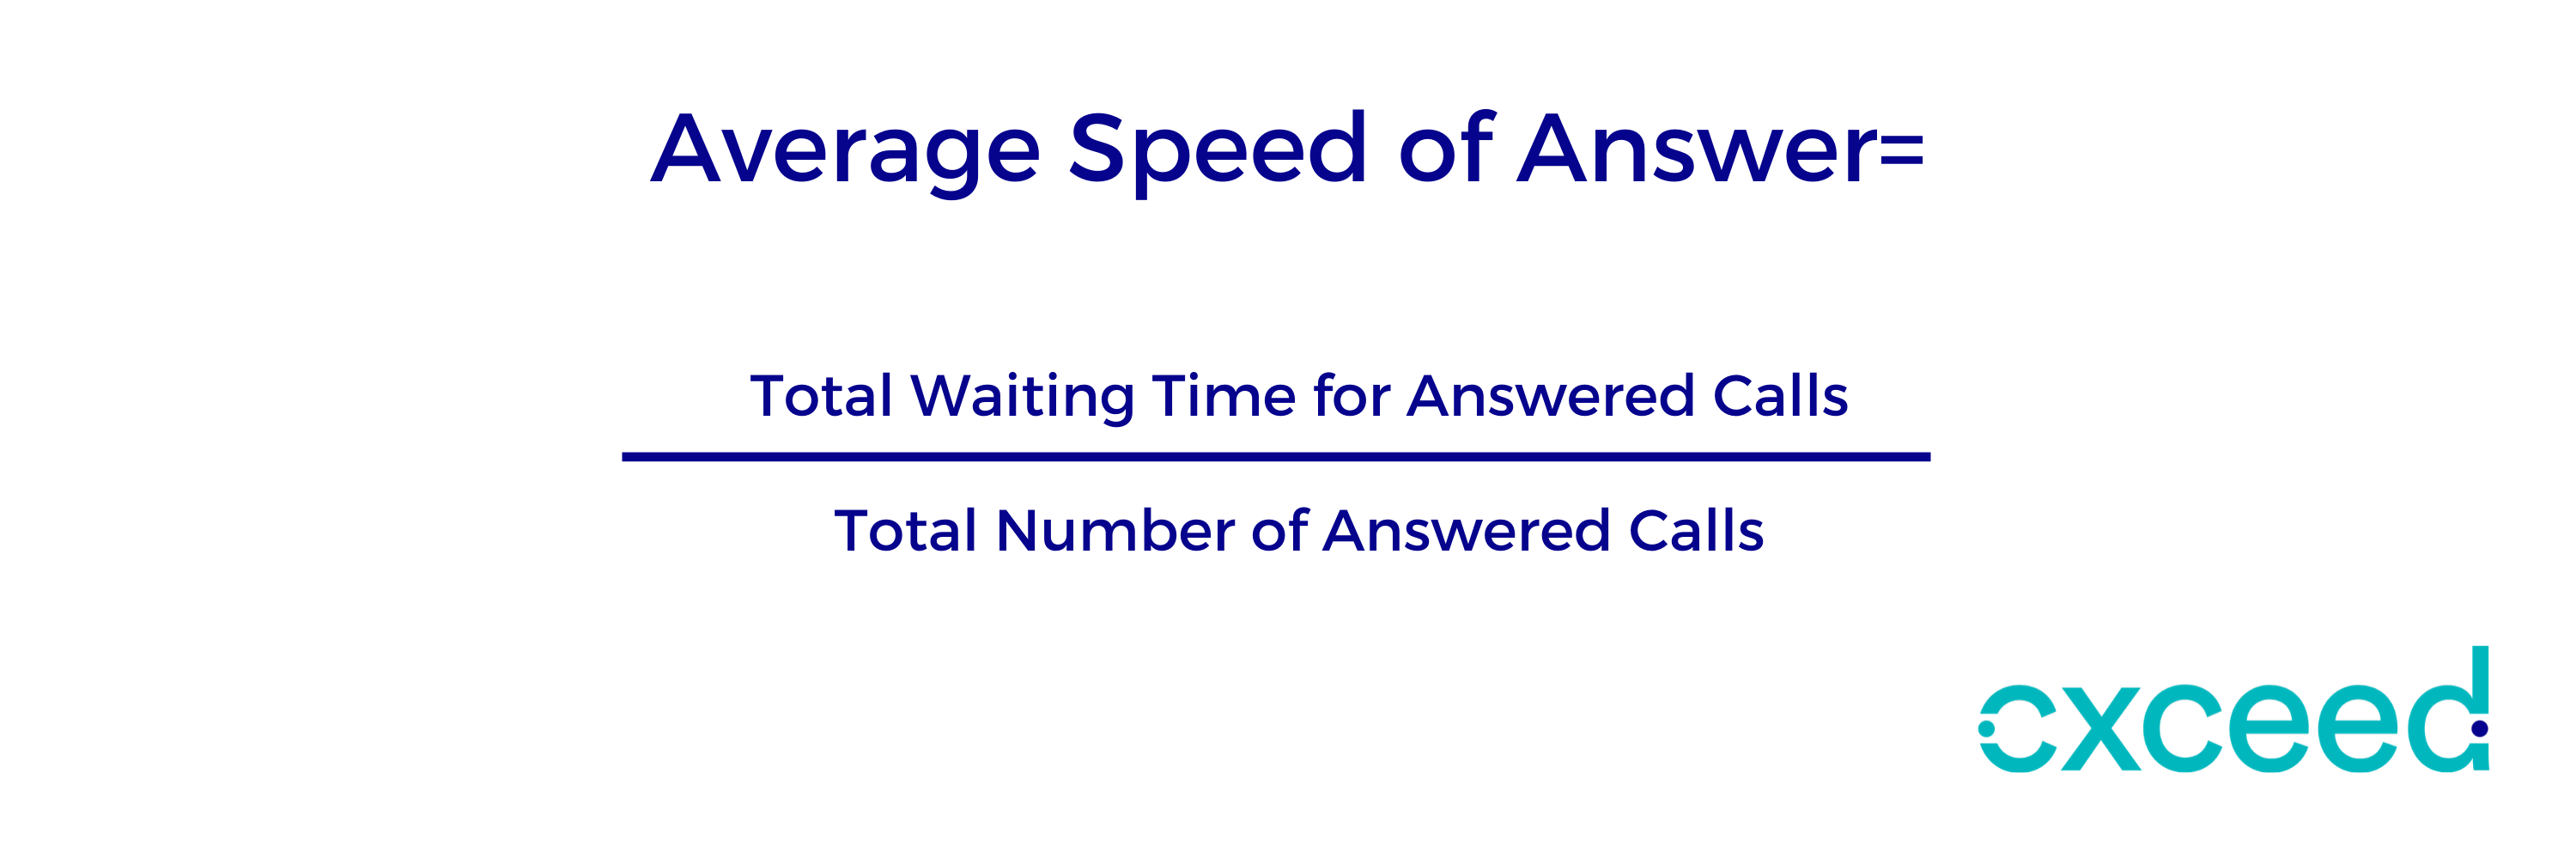 Average Speed of Answer